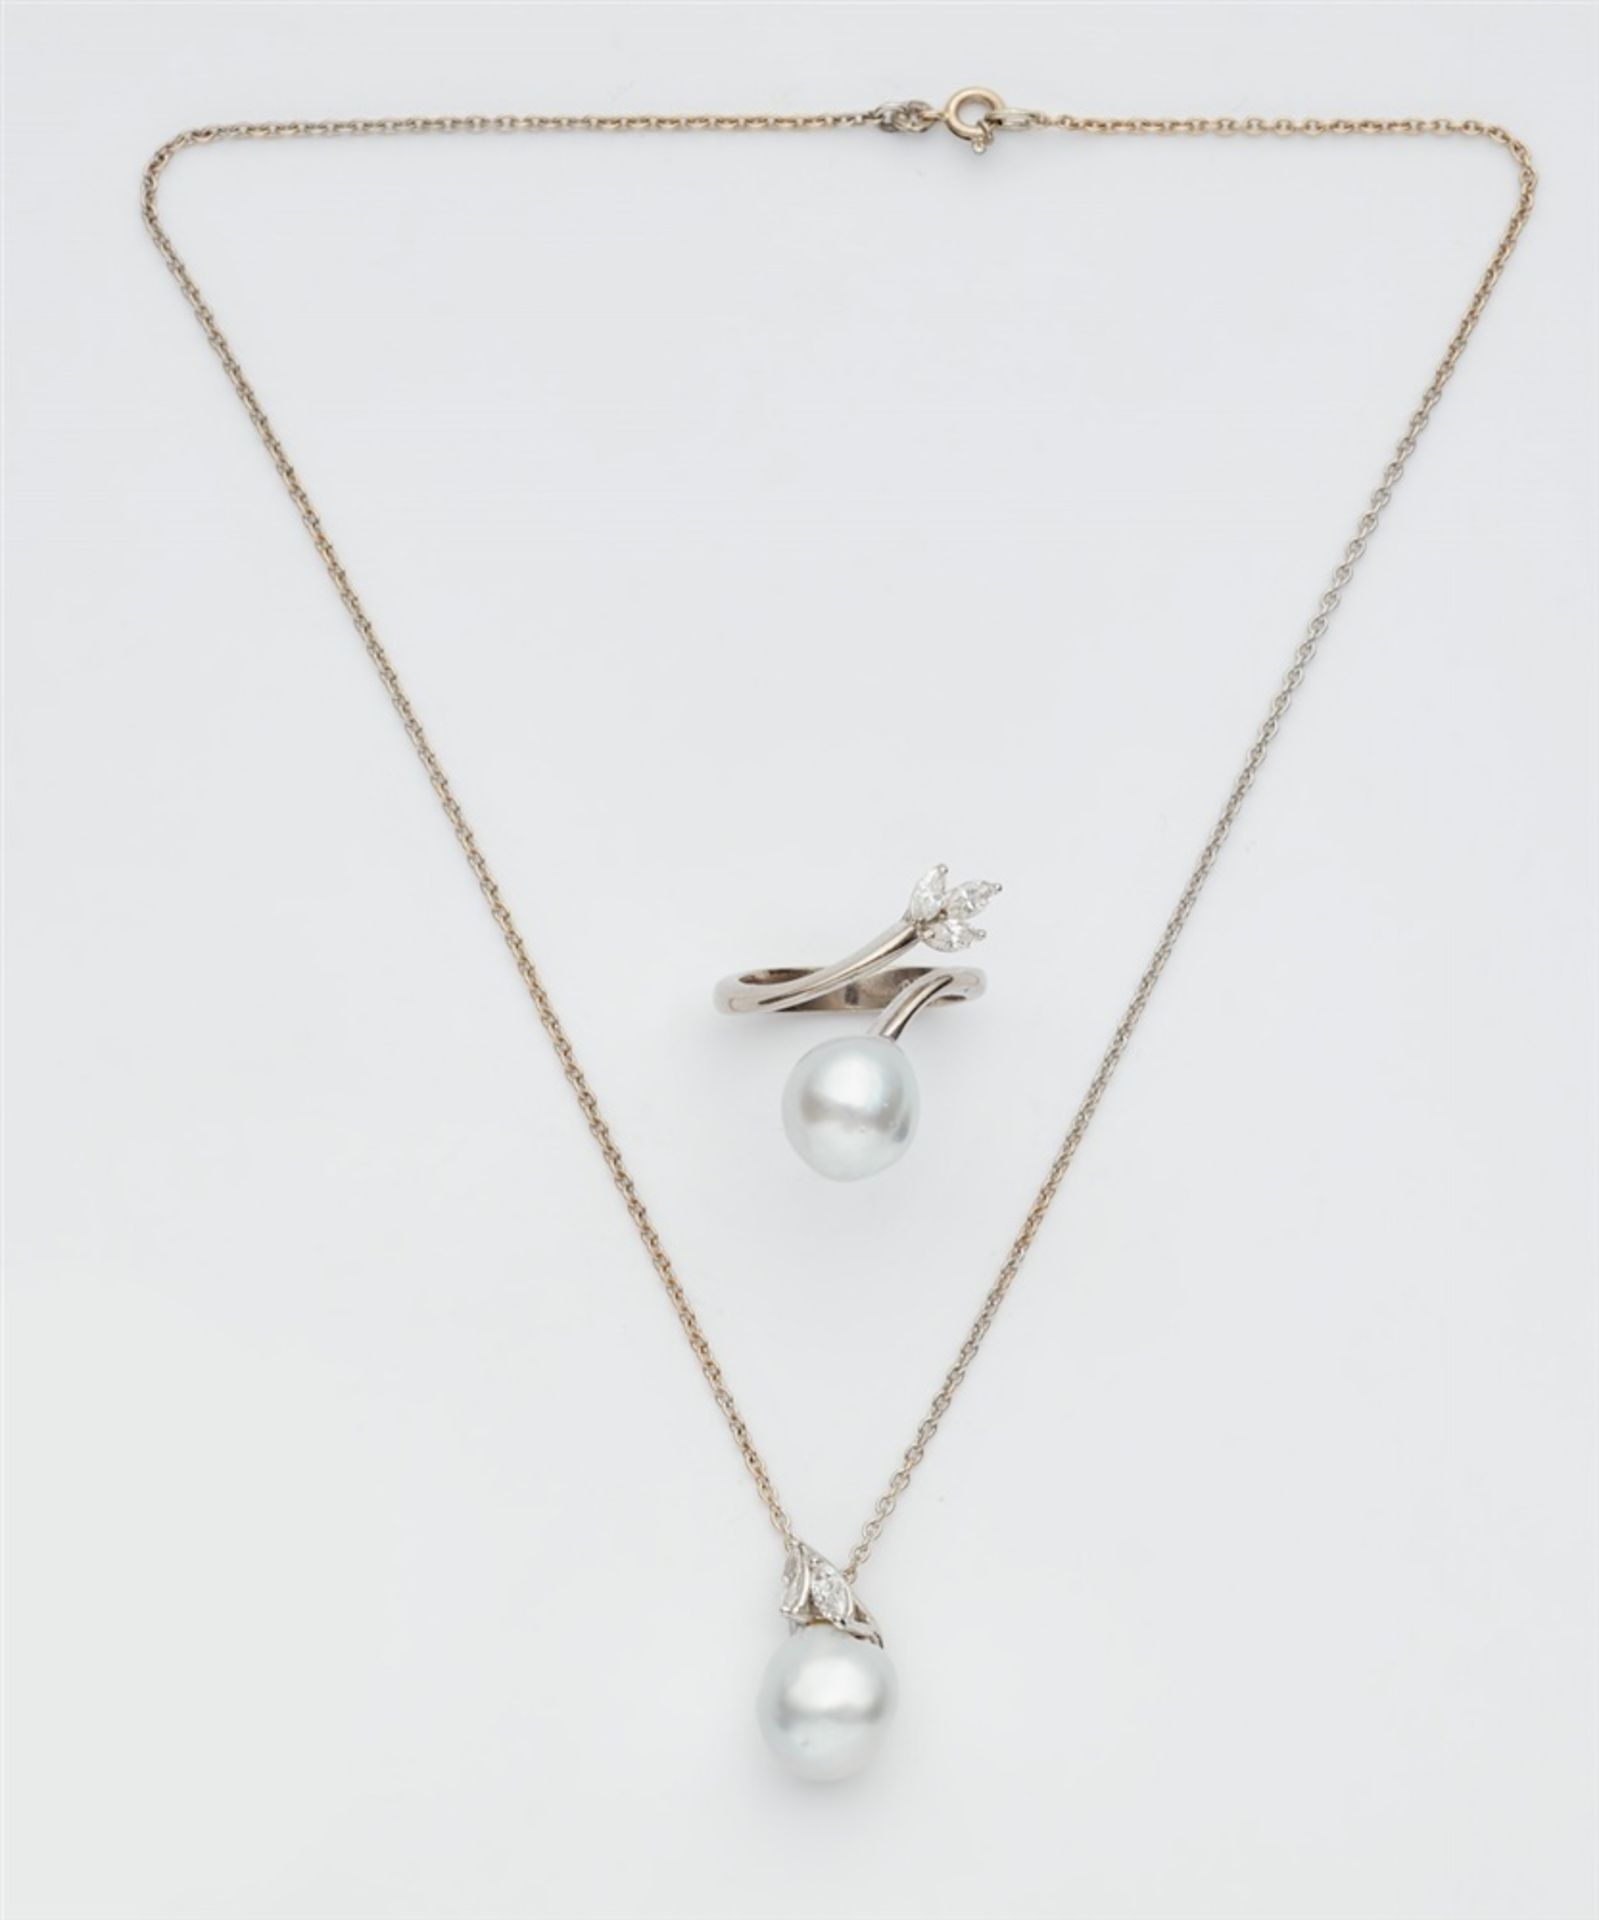 A pearl and diamond demi-parureComprising a pedant necklace and a ring. Custom-made design using